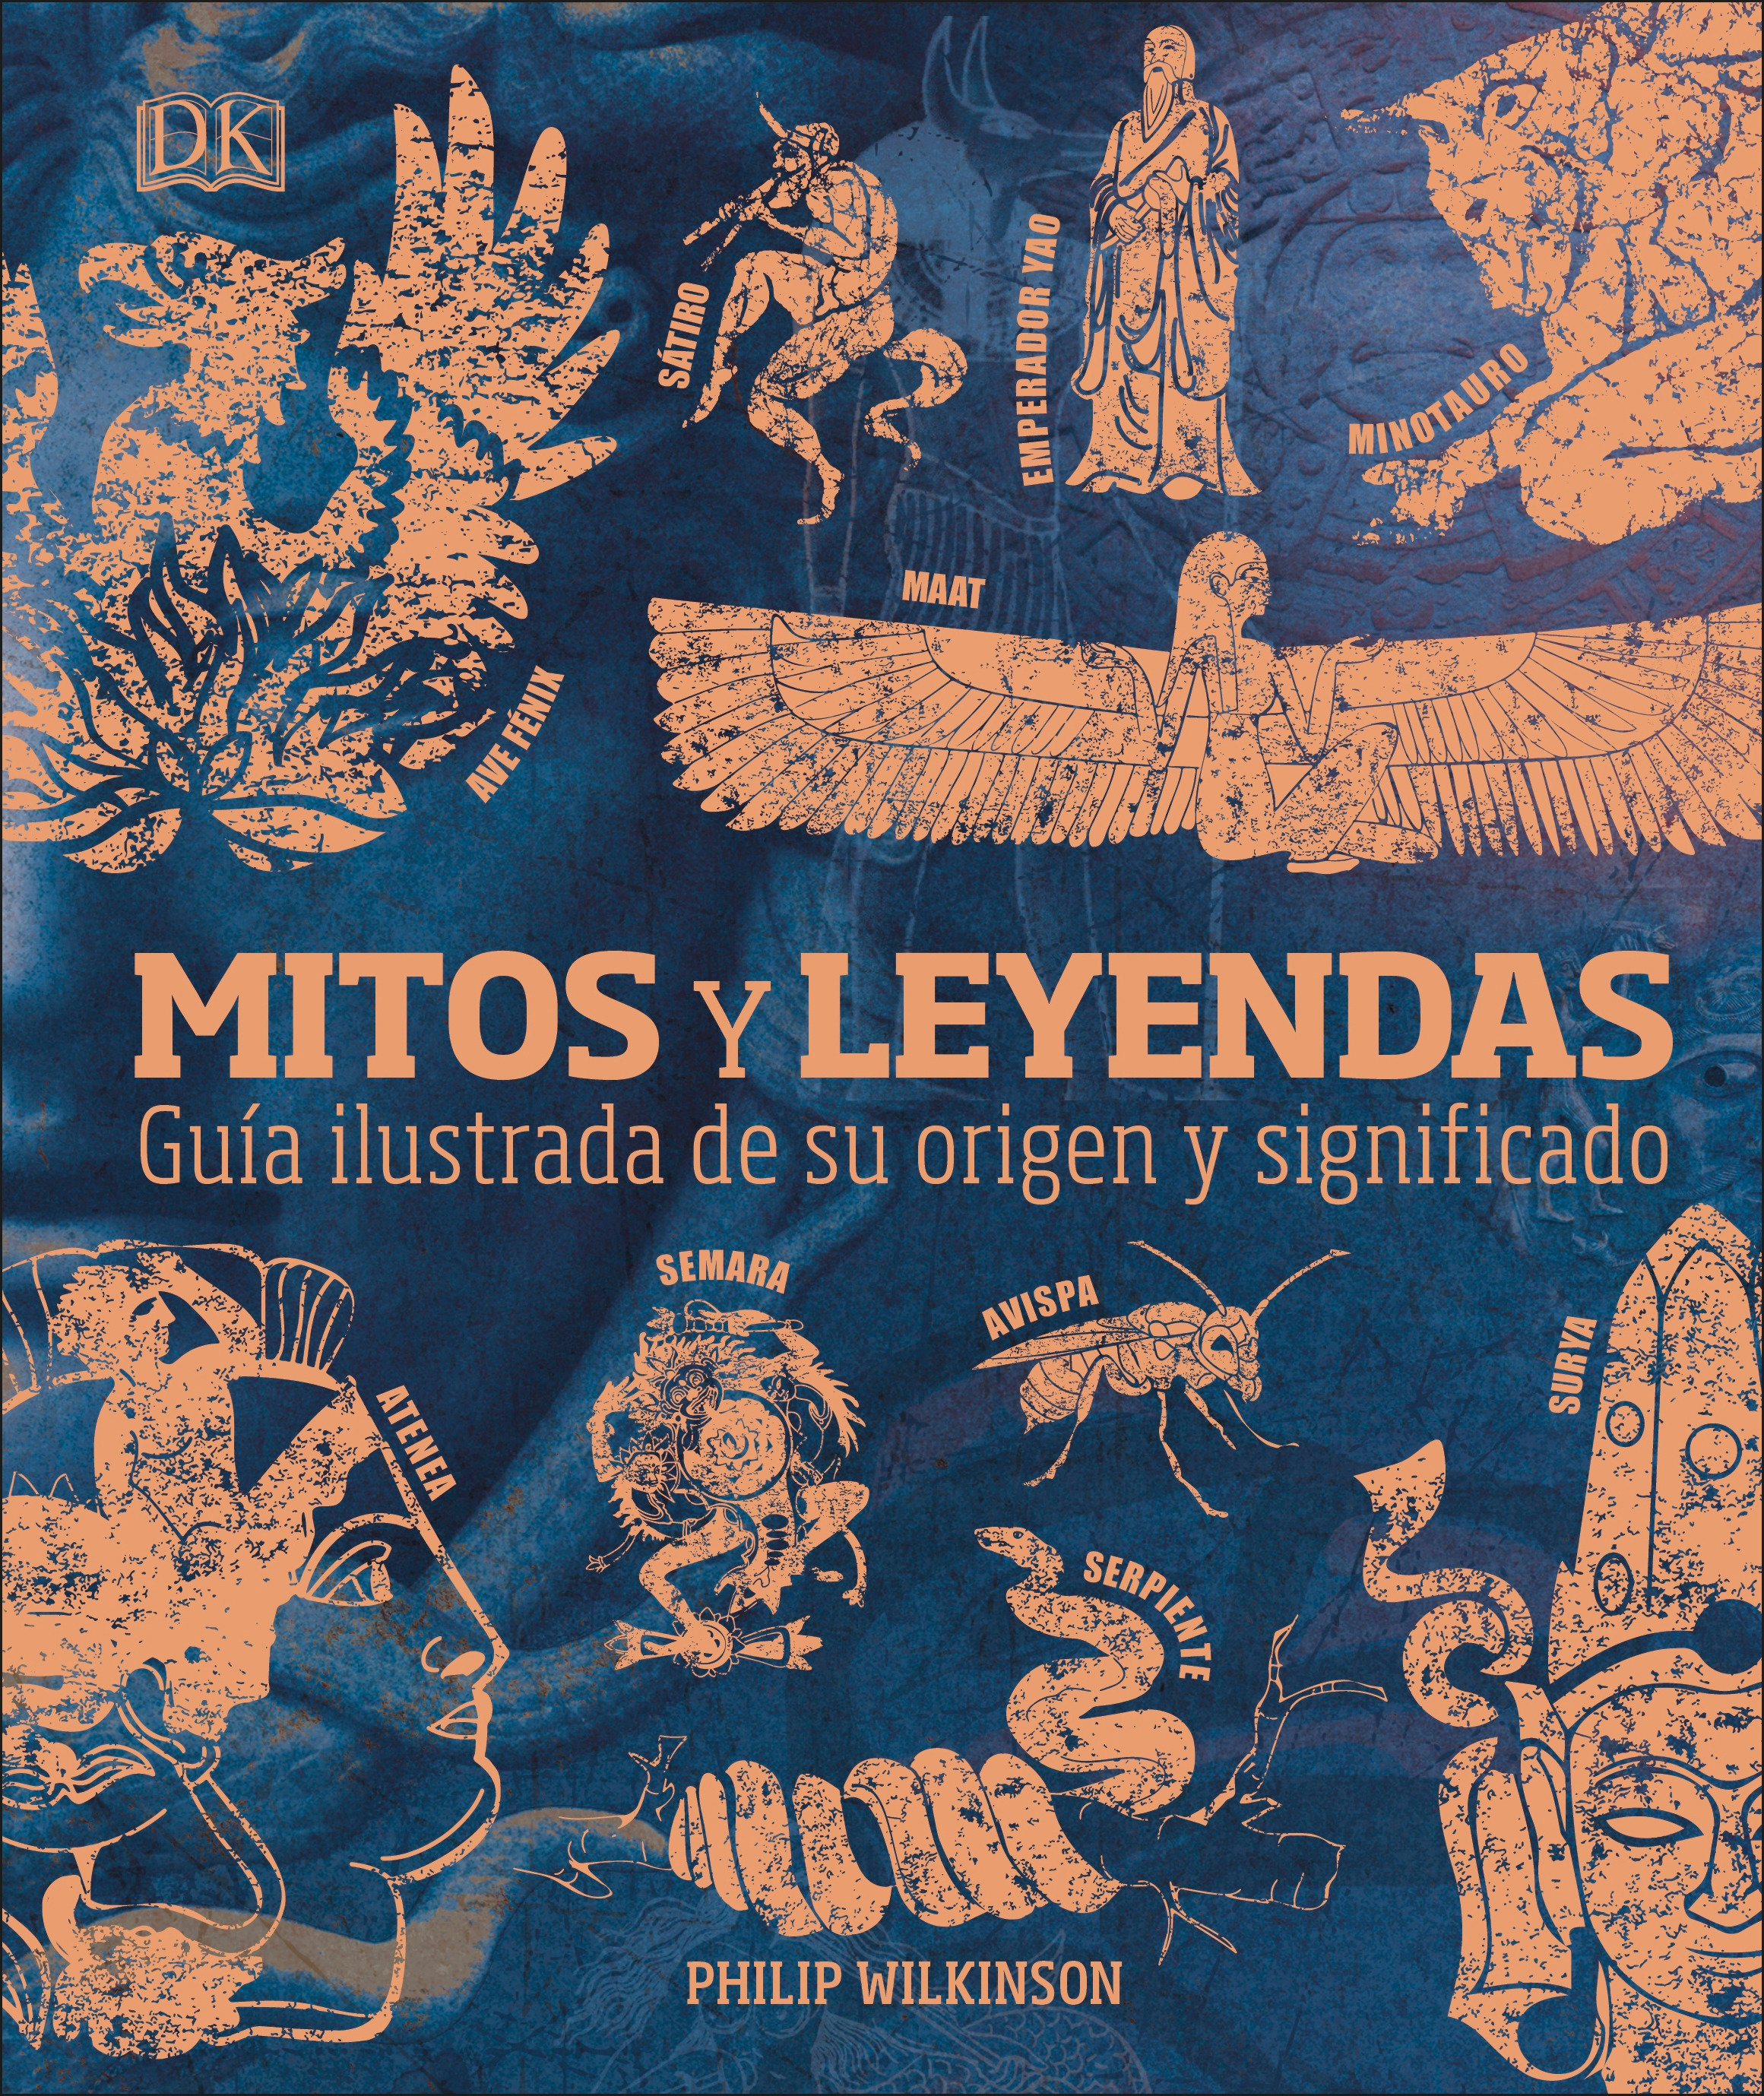 Mitos Y Leyendas (Myths And Legends), Myths And Legends (Hardcover Book)